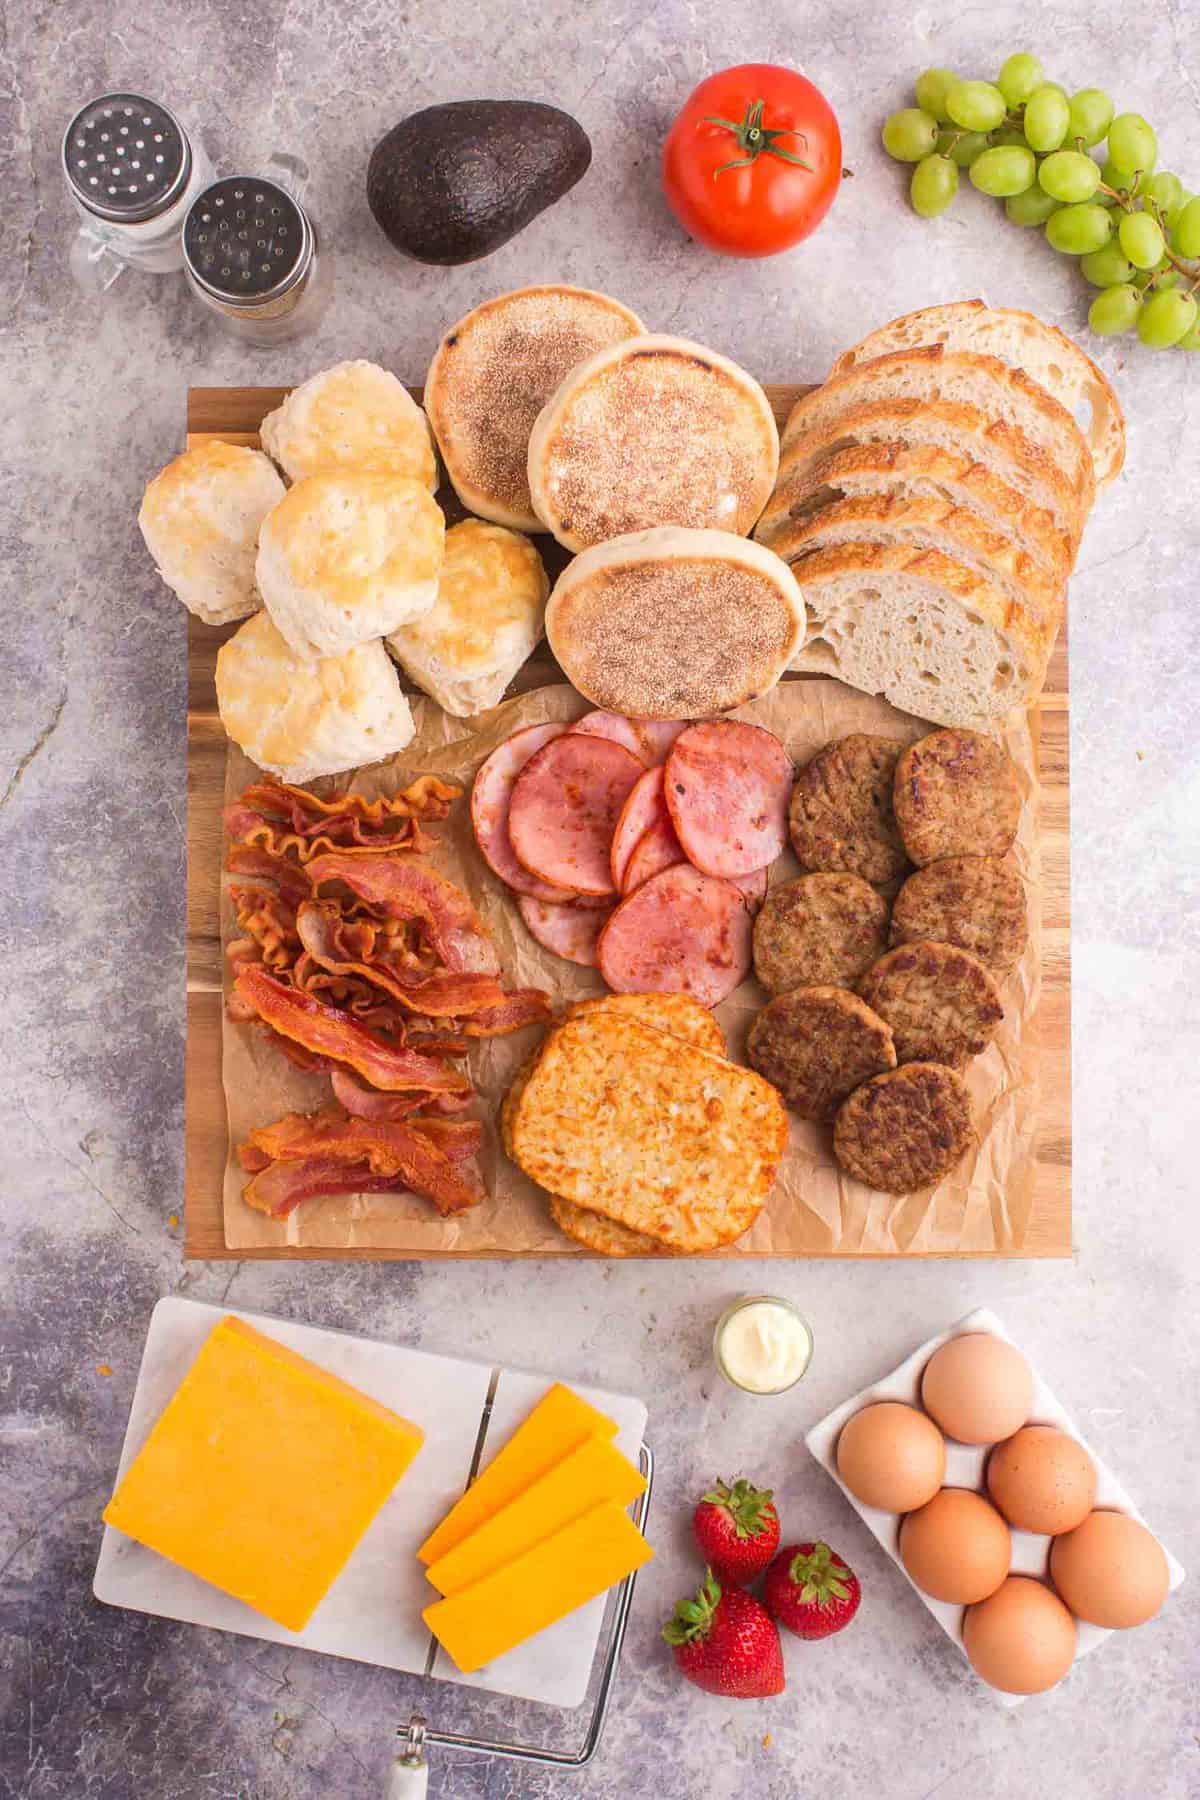 Not yet compiled breakfast board to make sandwiches.